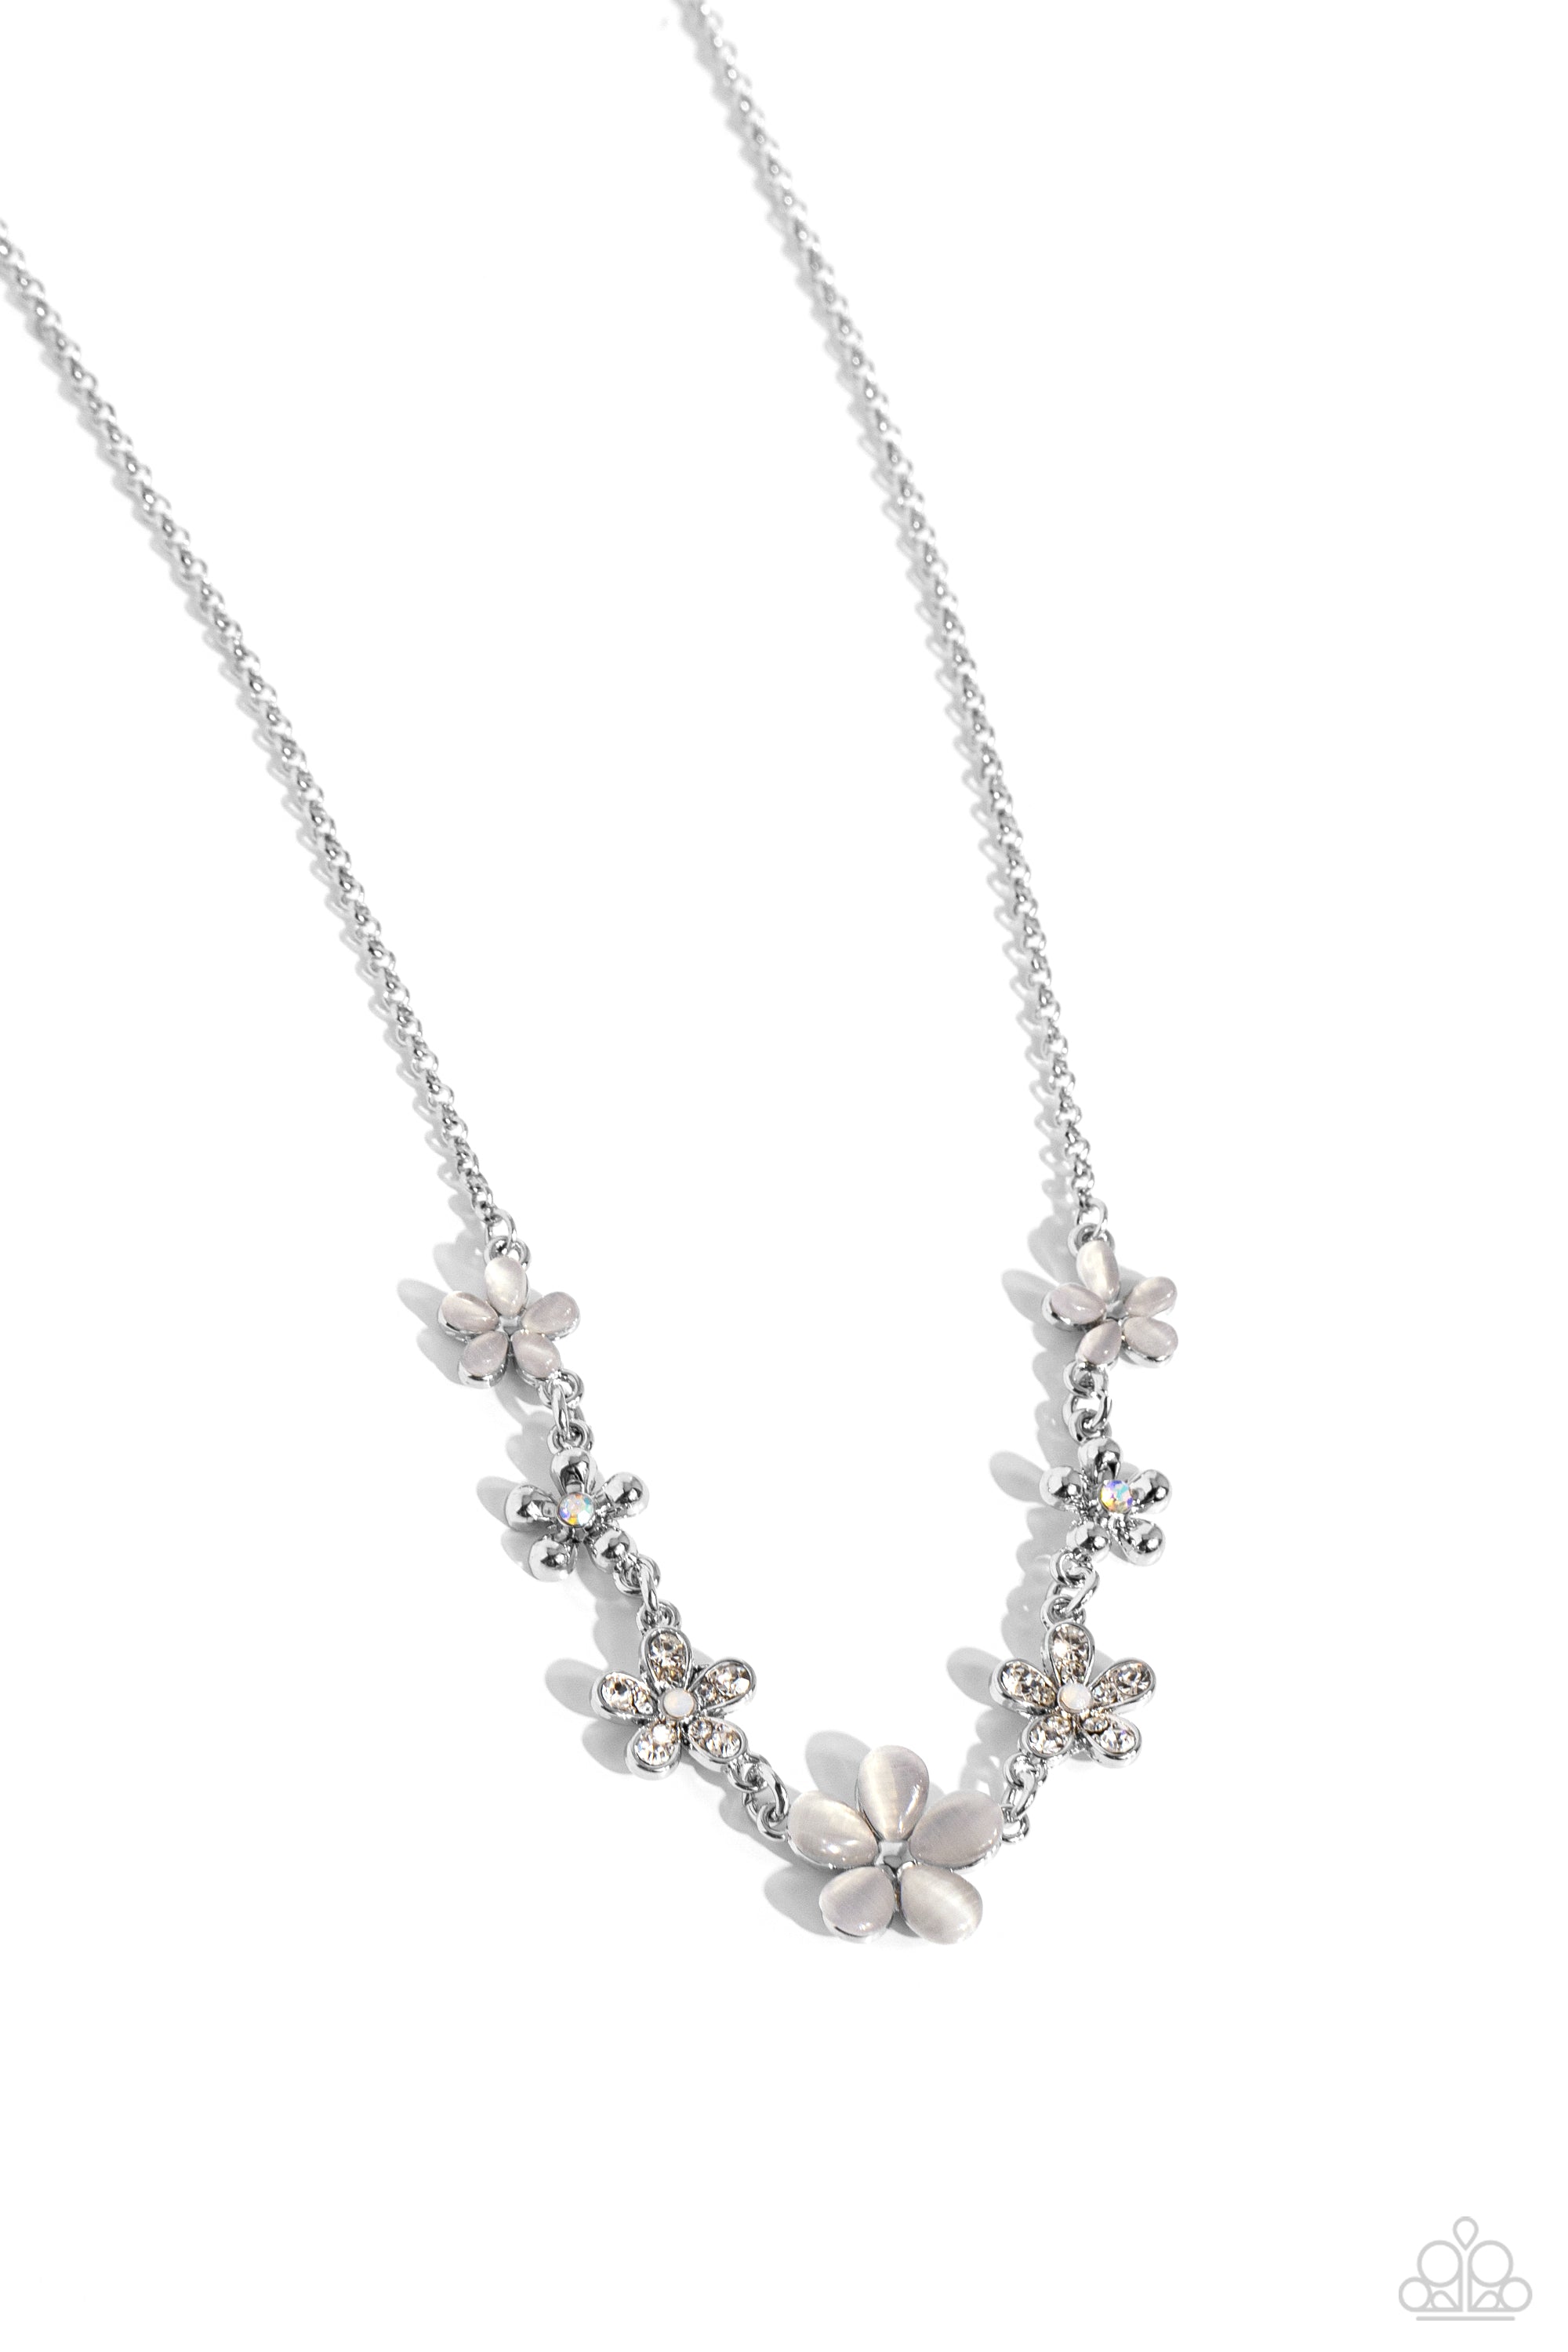 Spring Showcase White Cat's Eye Stone Floral Necklace - Paparazzi Accessories- lightbox - CarasShop.com - $5 Jewelry by Cara Jewels